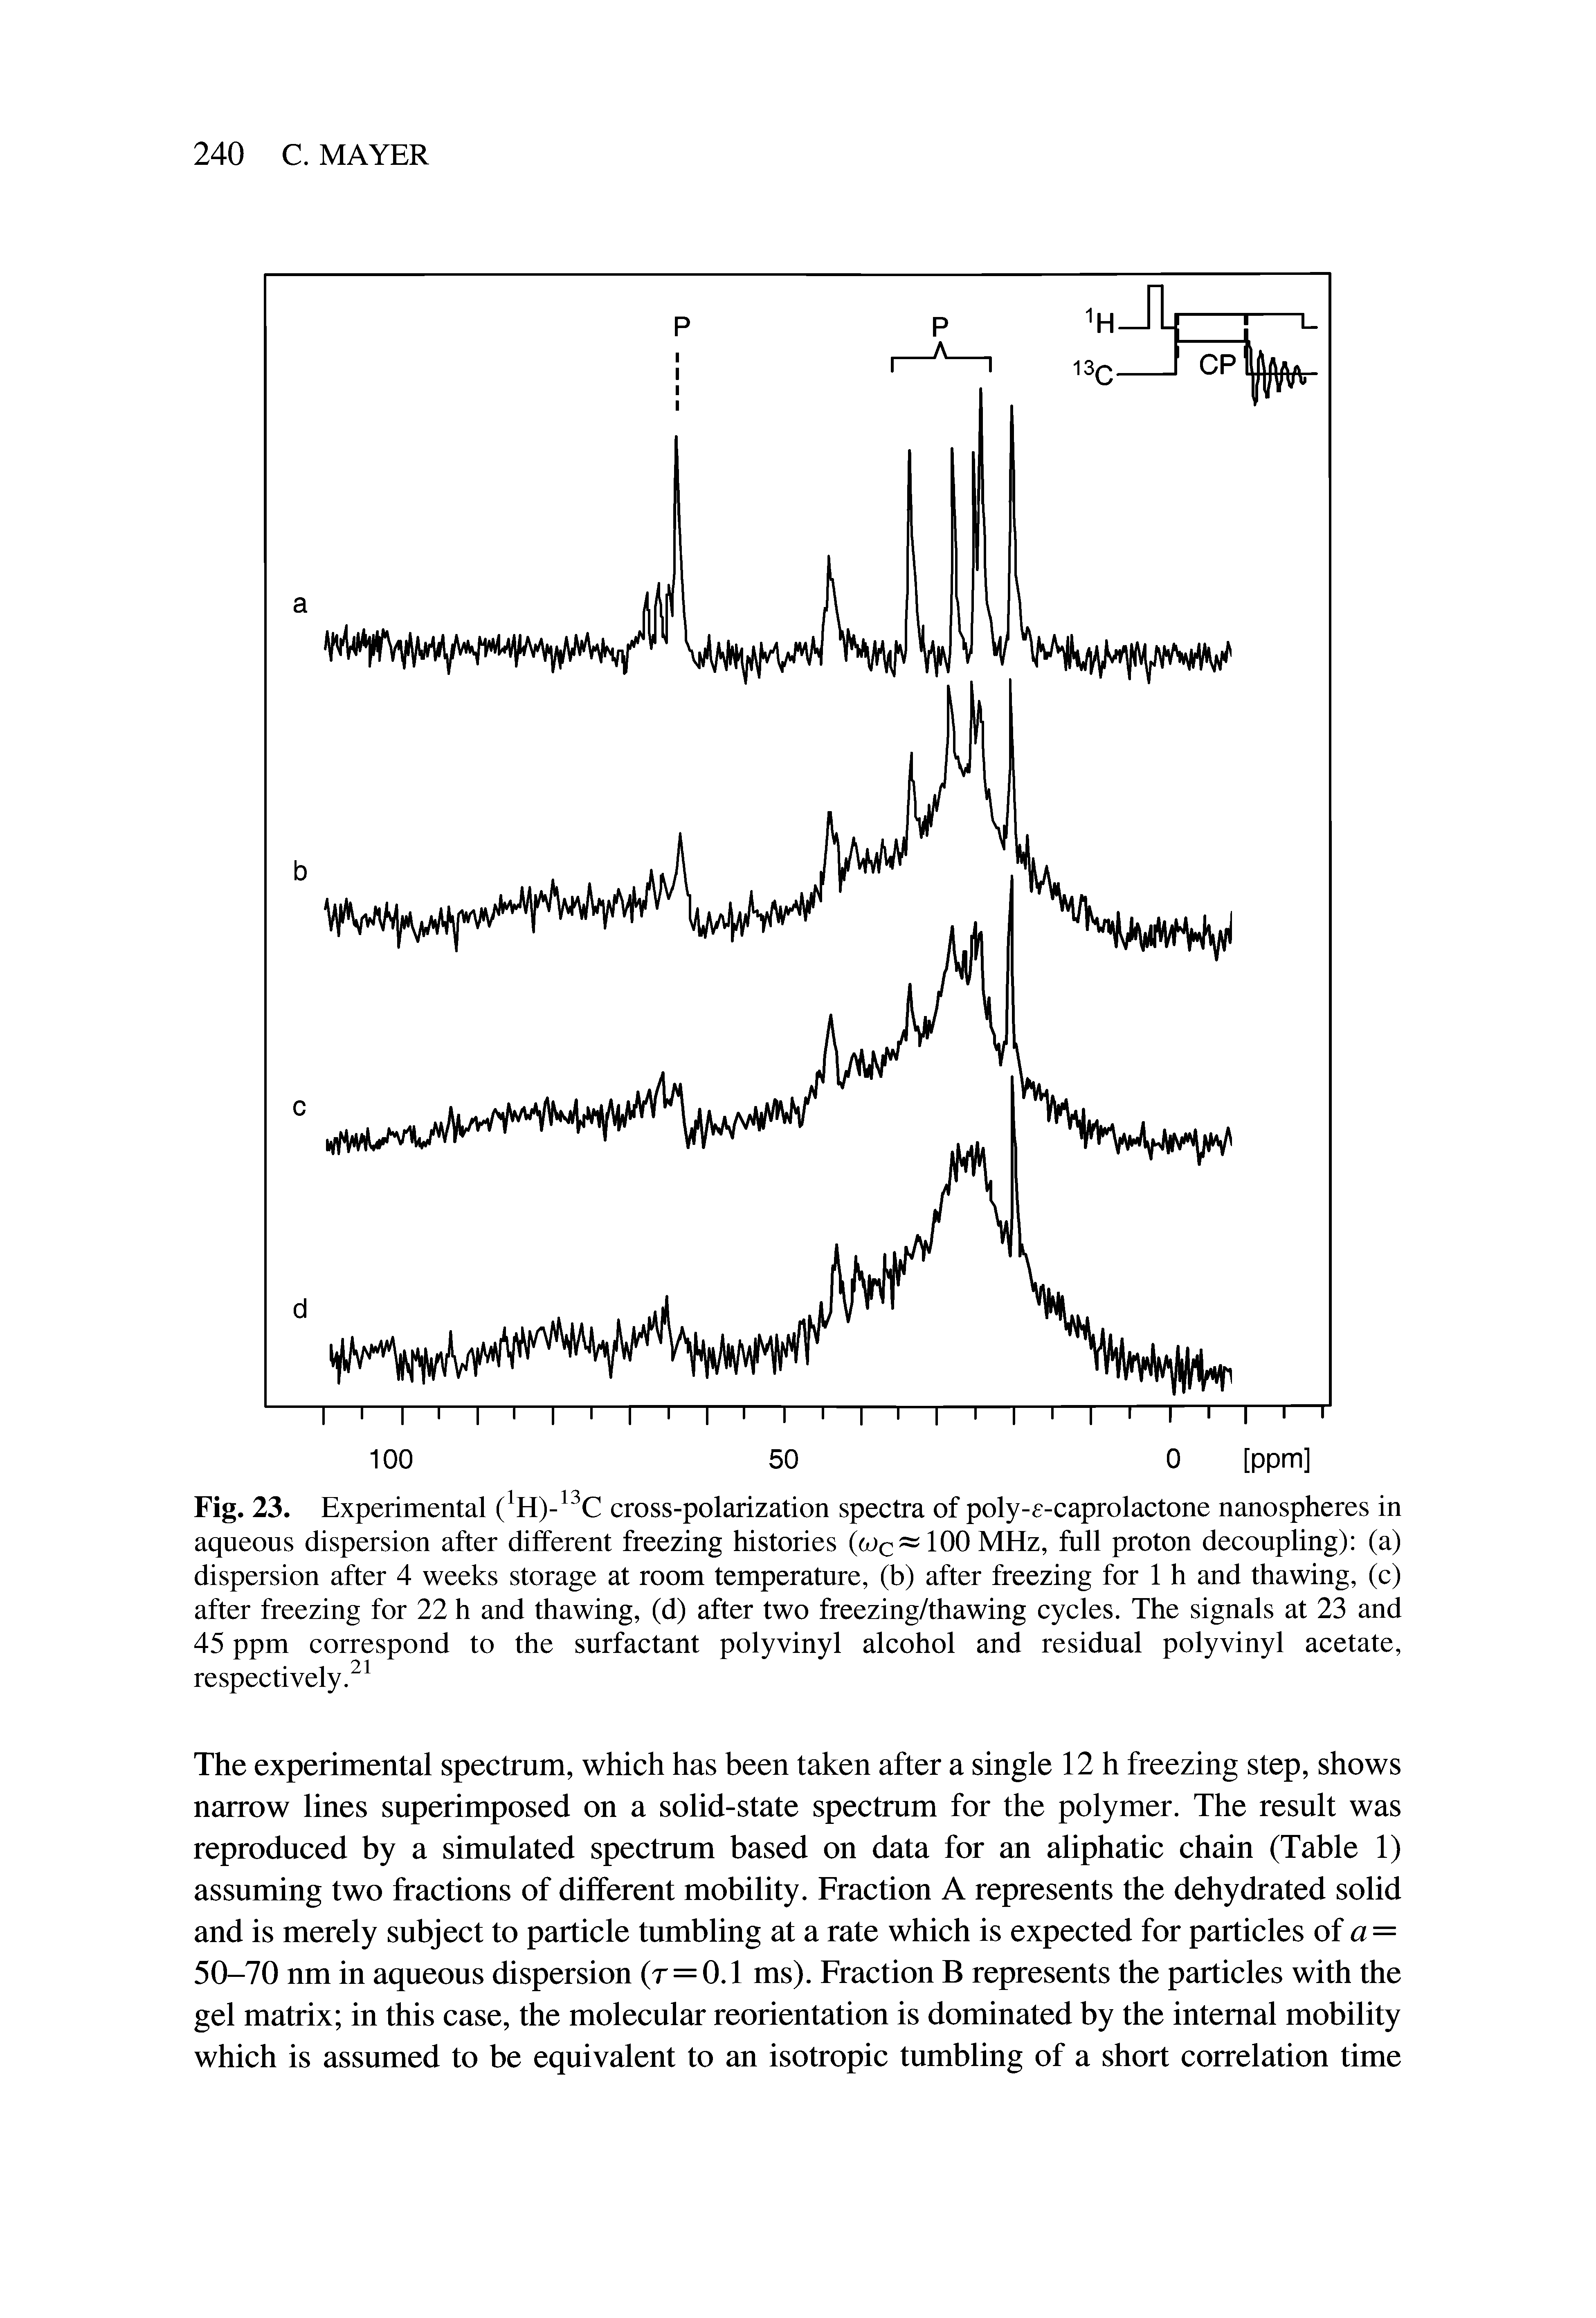 Fig. 23. Experimental ( H)- C cross-polarization spectra of poly-f-caprolactone nanospheres in aqueous dispersion after different freezing histories (wc 100MHz, full proton decoupling) (a) dispersion after 4 weeks storage at room temperature, (b) after freezing for 1 h and thawing, (c) after freezing for 22 h and thawing, (d) after two freezing/thawing cycles. The signals at 23 and 45 ppm correspond to the surfactant polyvinyl alcohol and residual polyvinyl acetate, respectively. ...